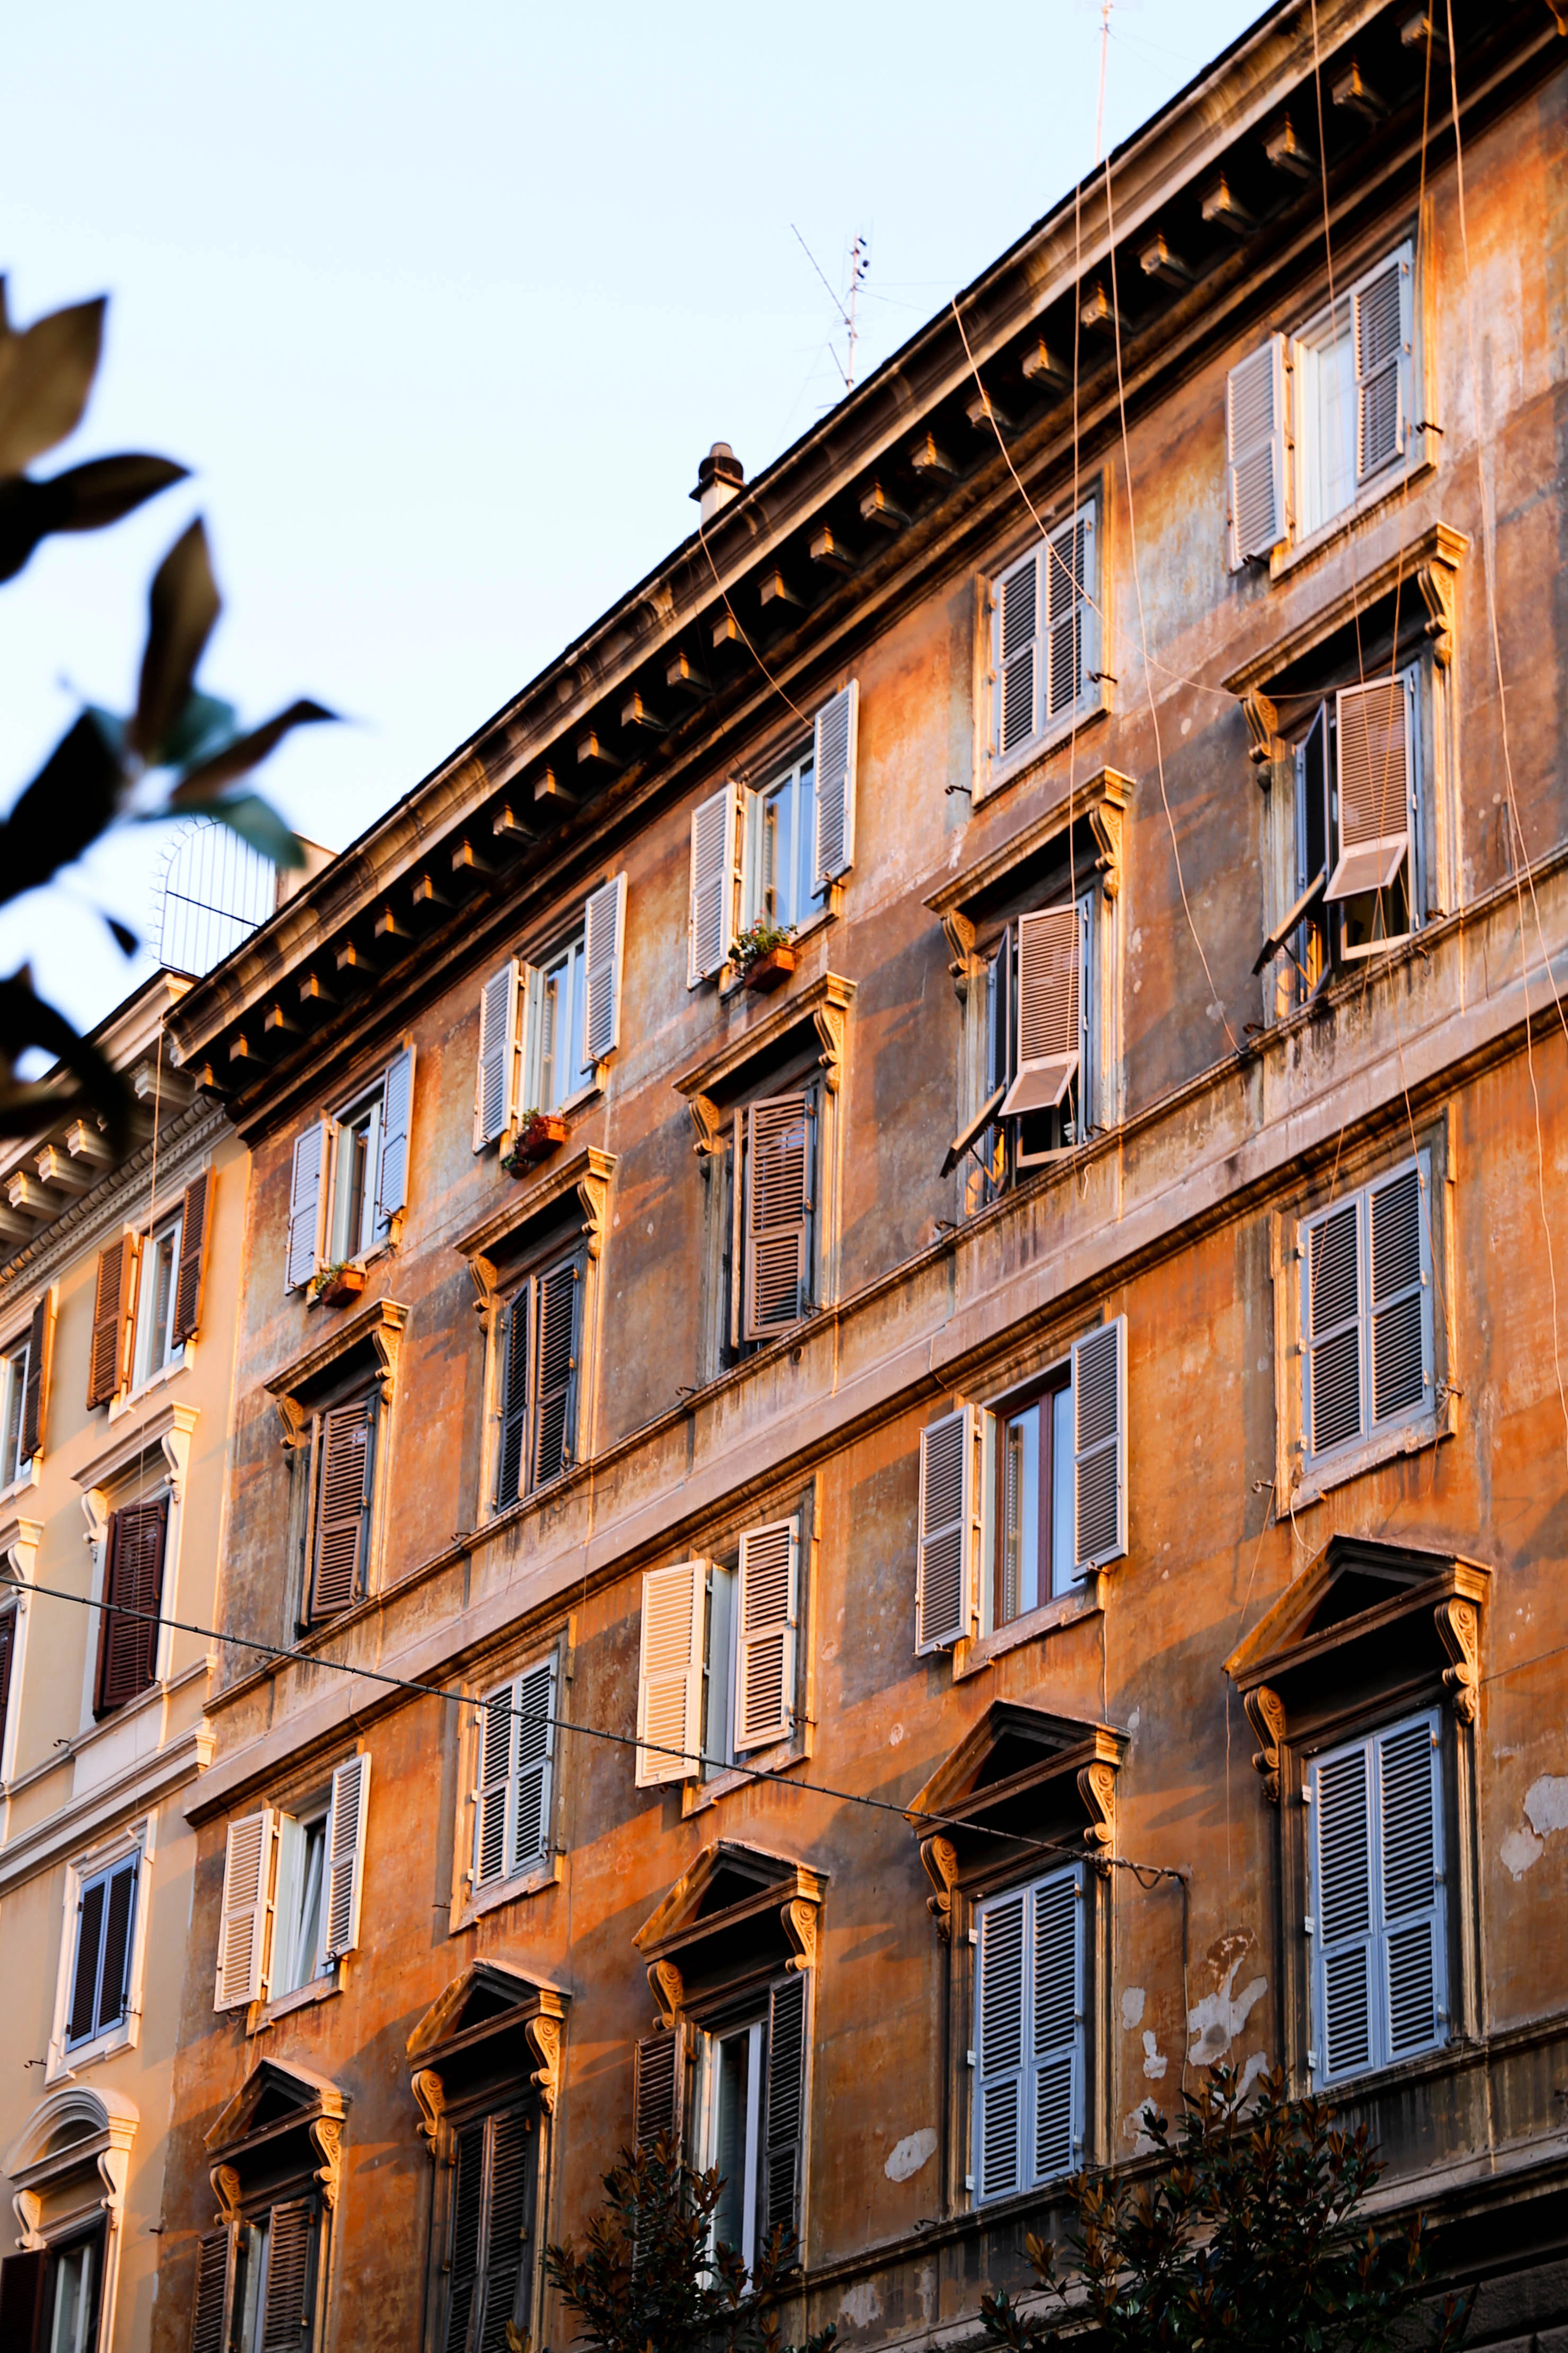 A terracotta coloured building with rows of windows and shutters.